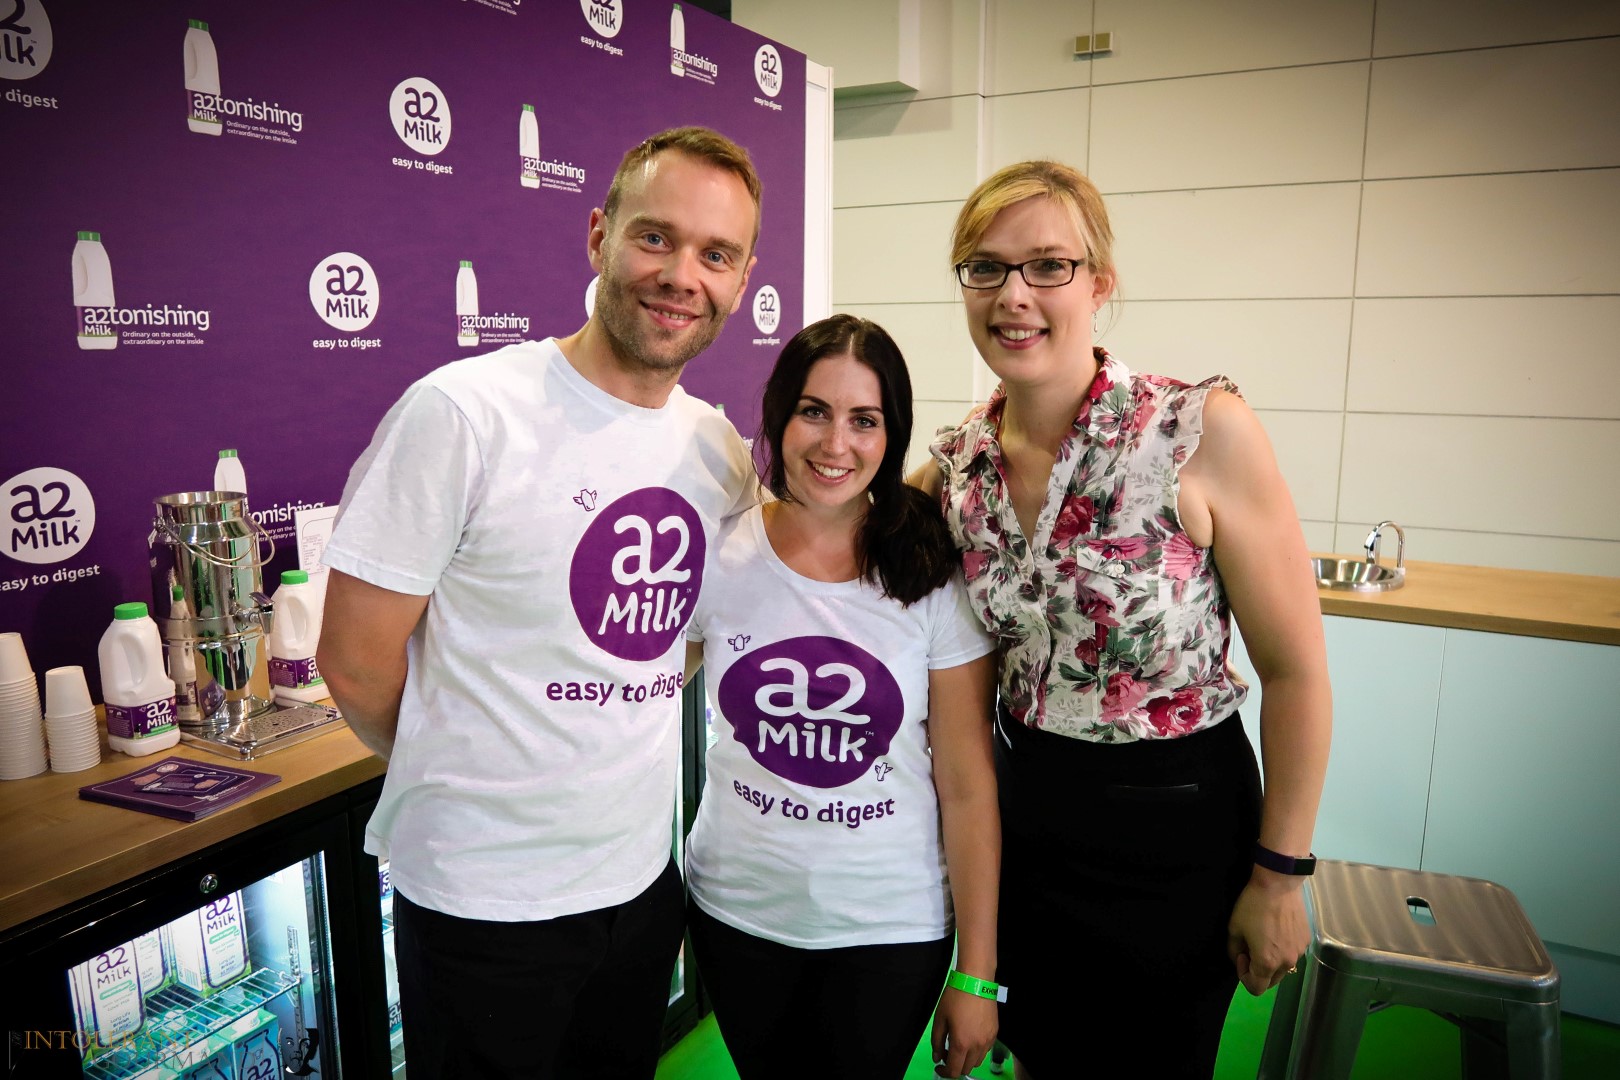 Allergy Show London 2017 - part of the team at a2 Milk working at the Allergy Show London Olympia! www.intolerantgourmand.com